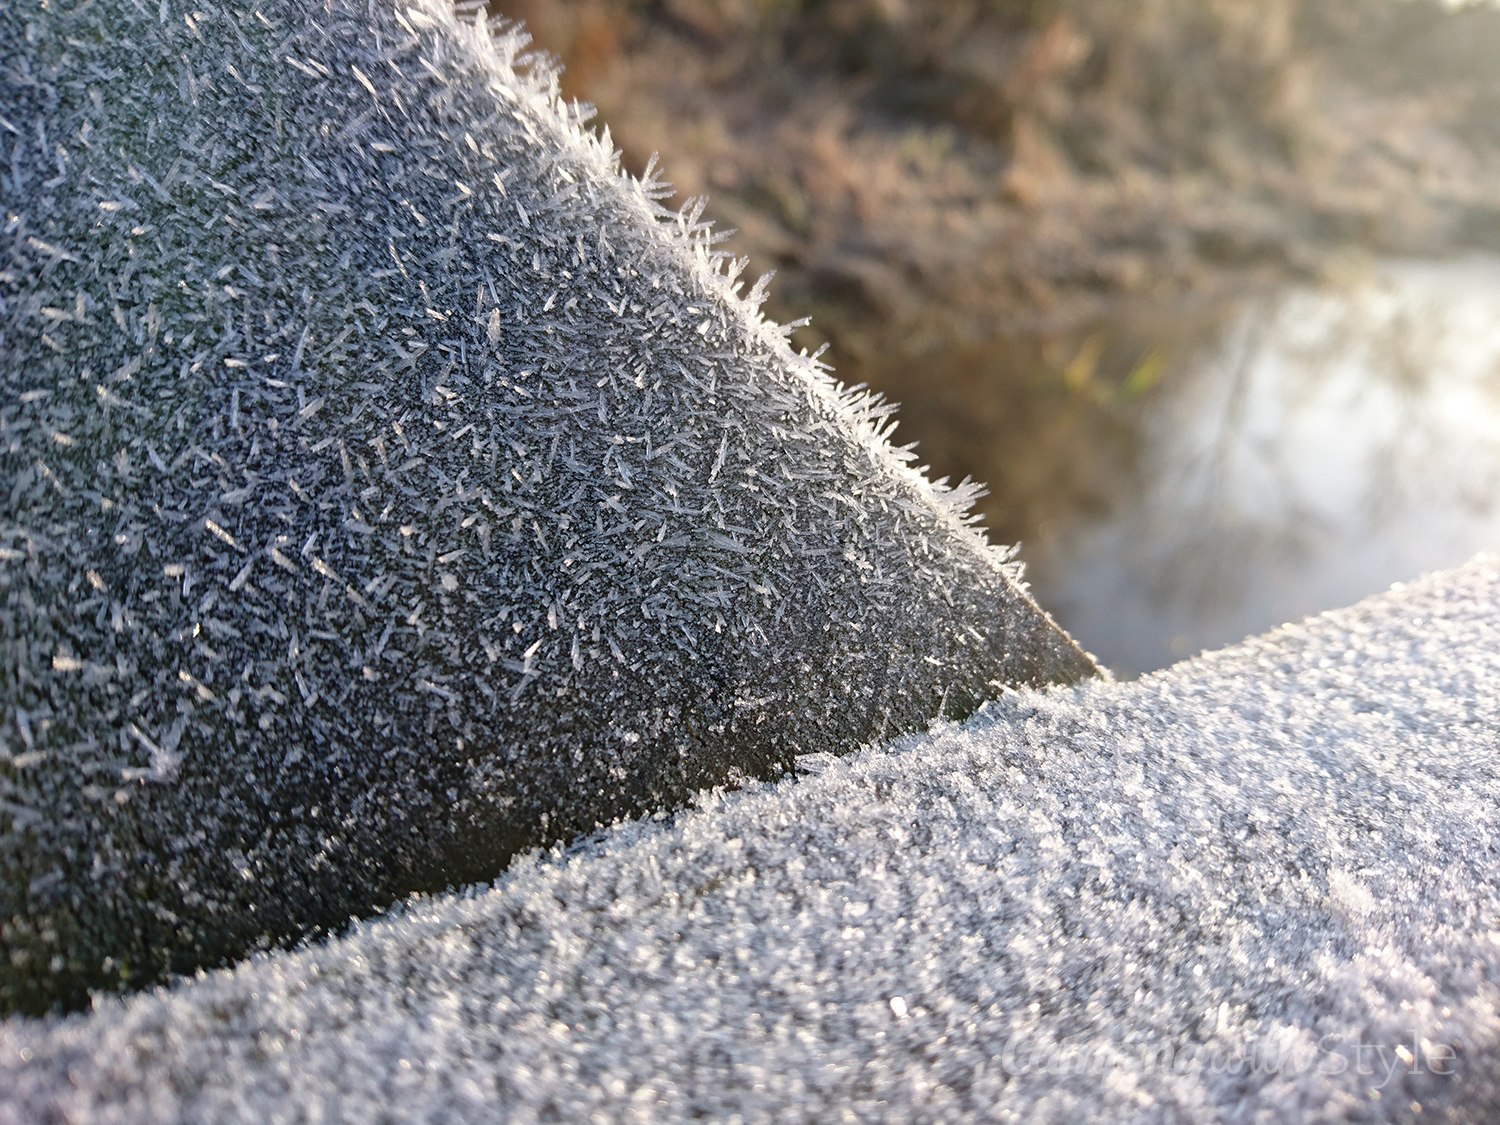 Macro shot of some frost